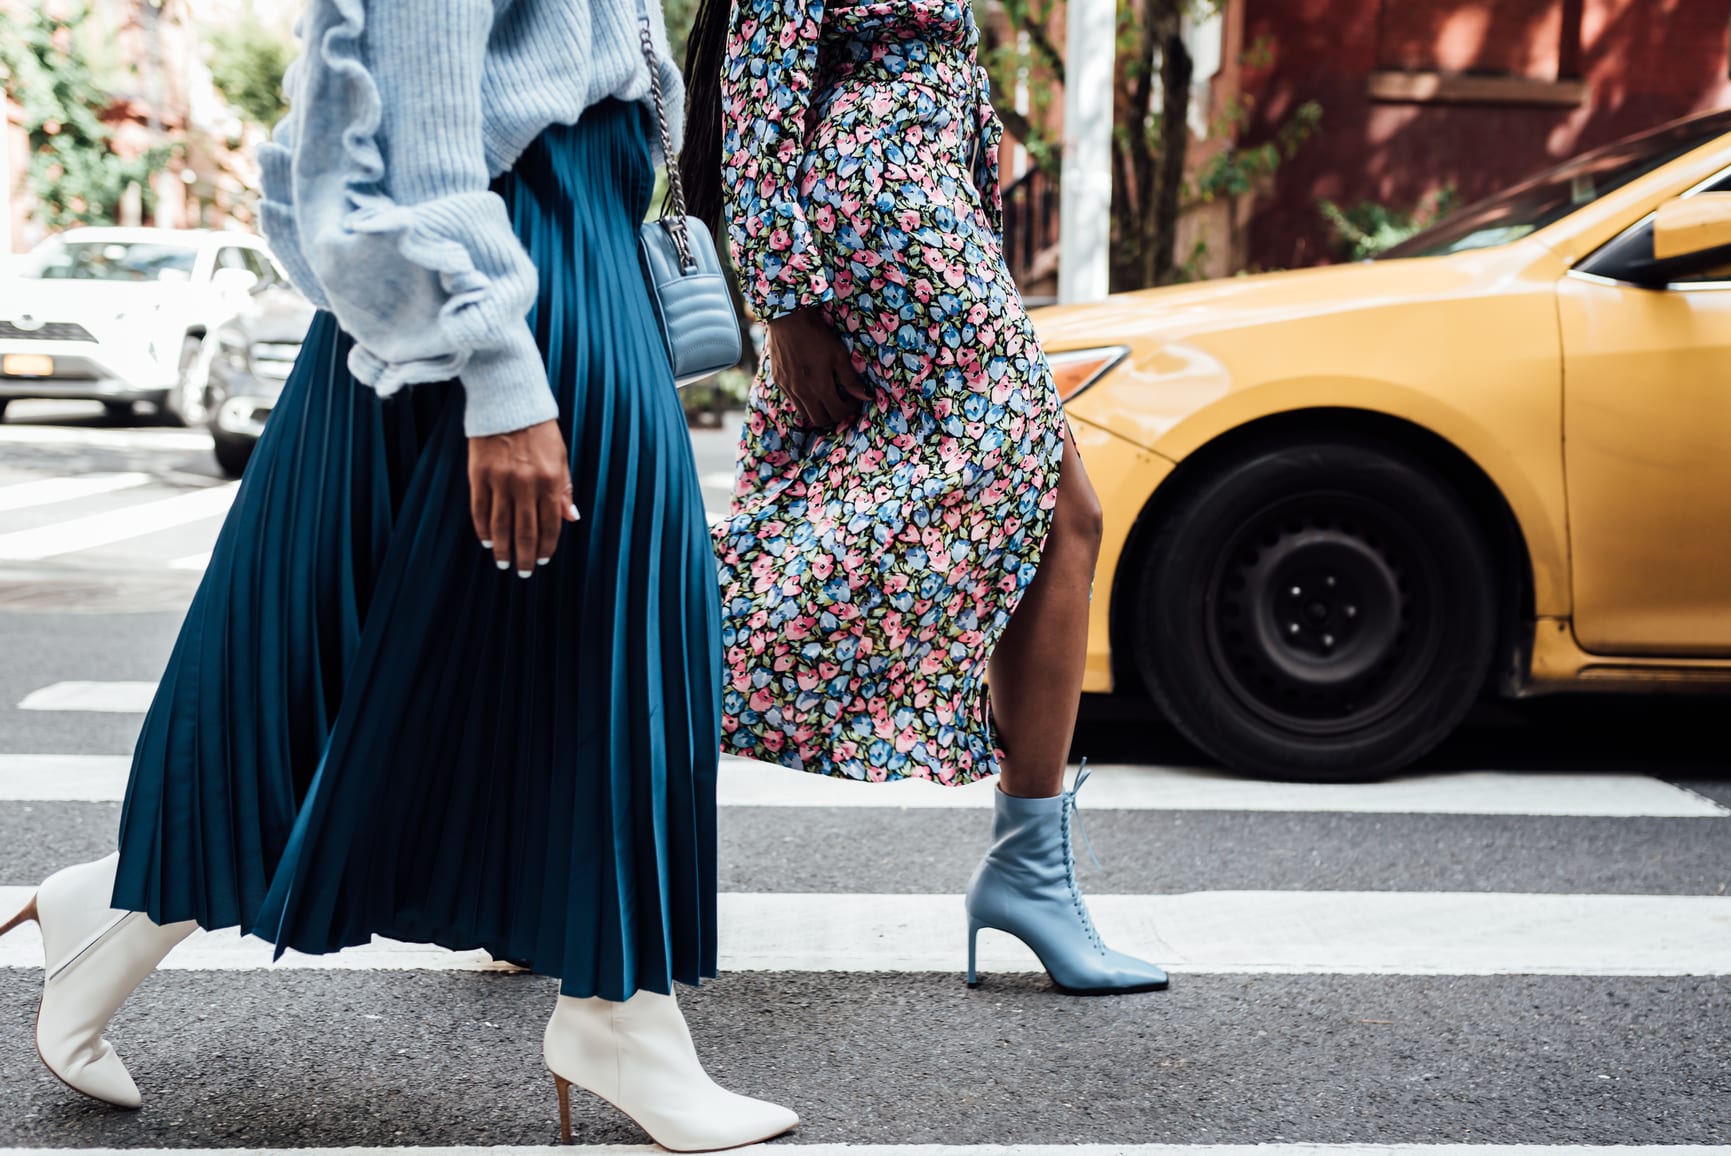 Two women walking in the city wearing blue and heels